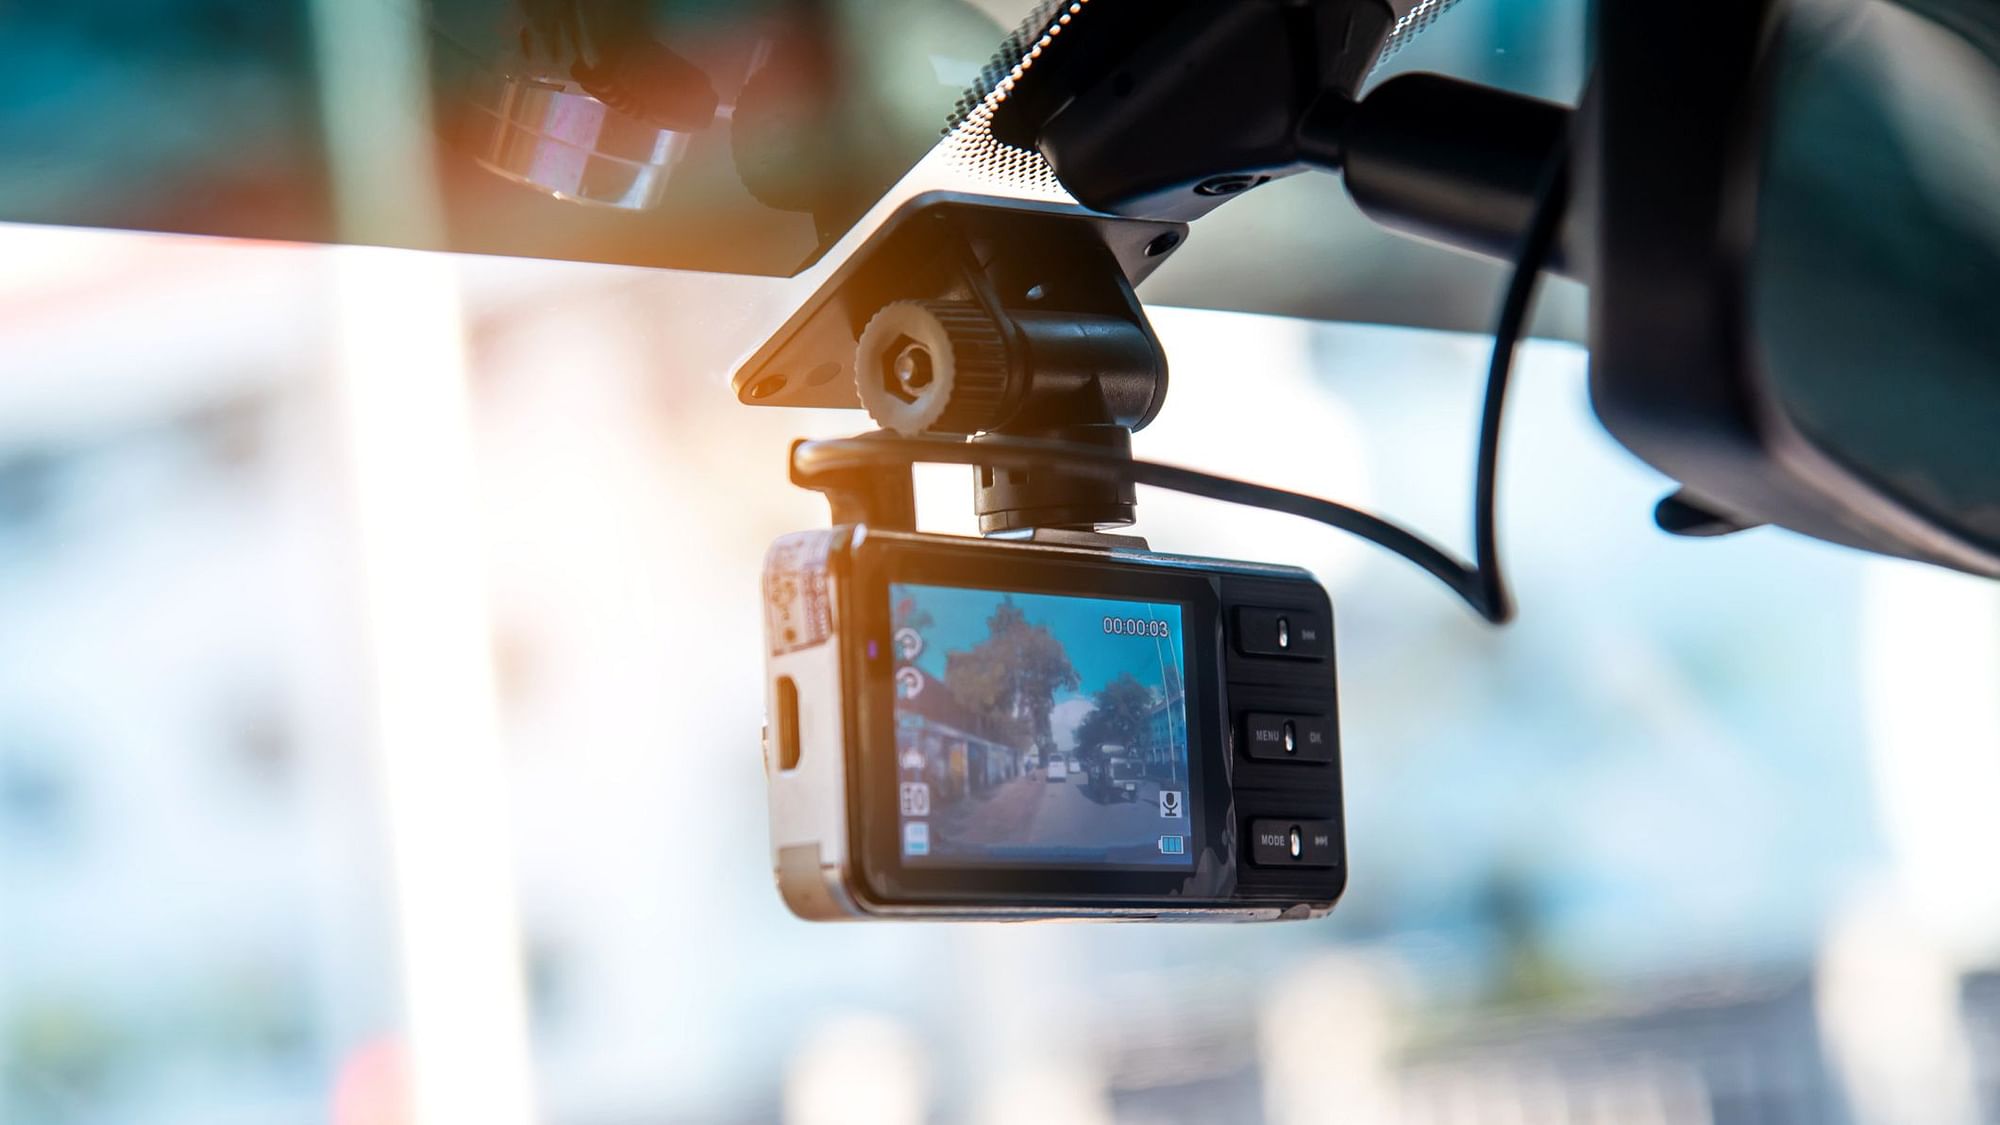 Dashboard cameras or dashcams are now a necessity with the increasing chaotic traffic conditions in Indian cities.